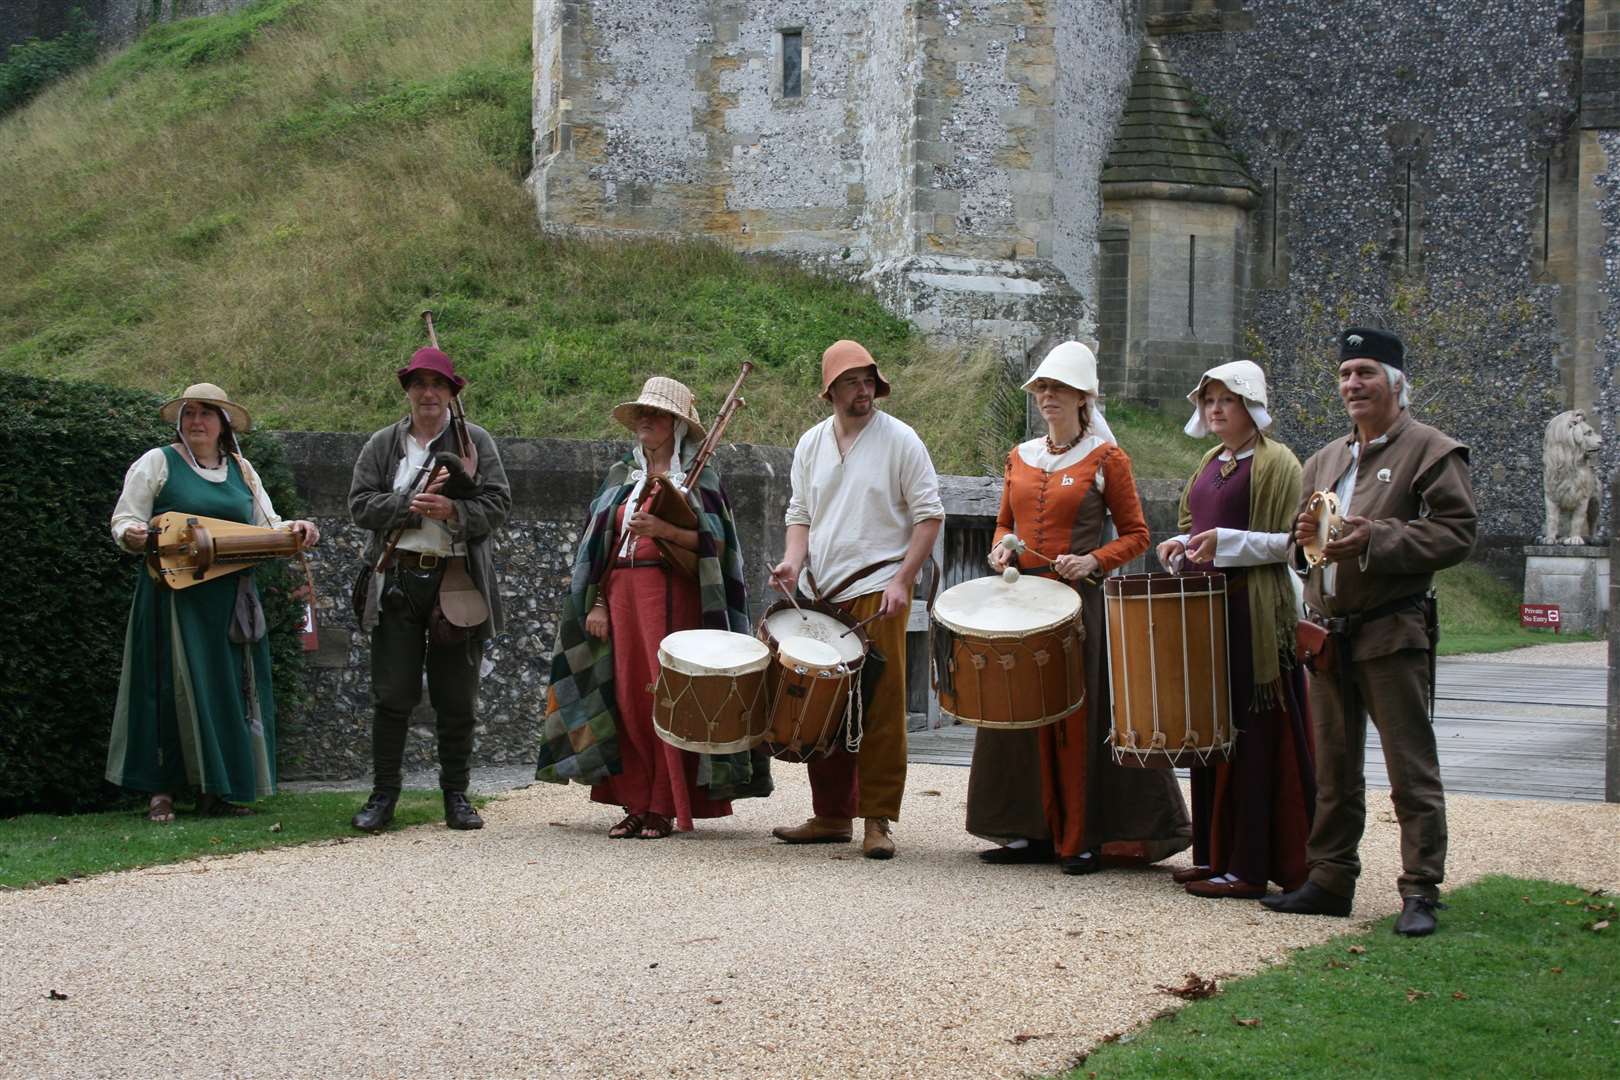 Medieval band Rough Musicke celebrating the Magna Carta arrival in Sandwich